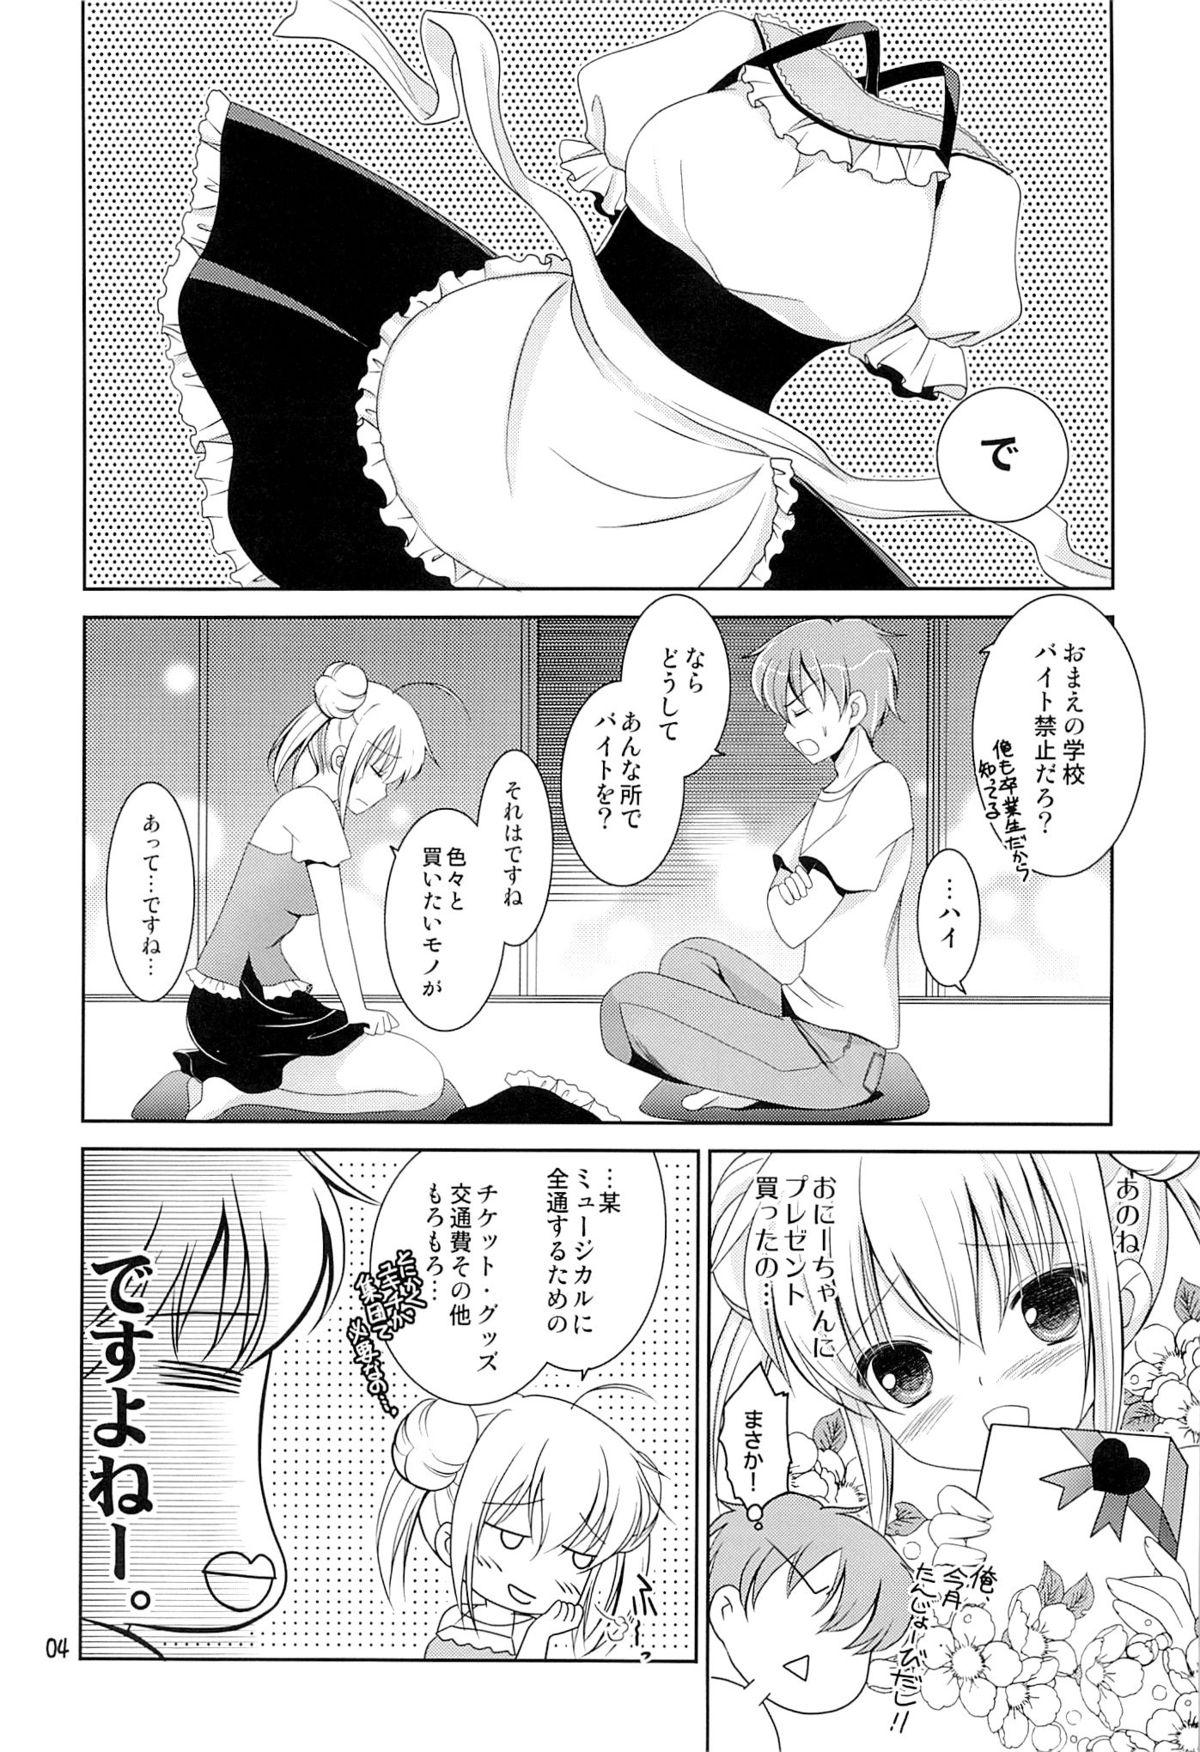 Massages Imouto Maid Stream - Page 3